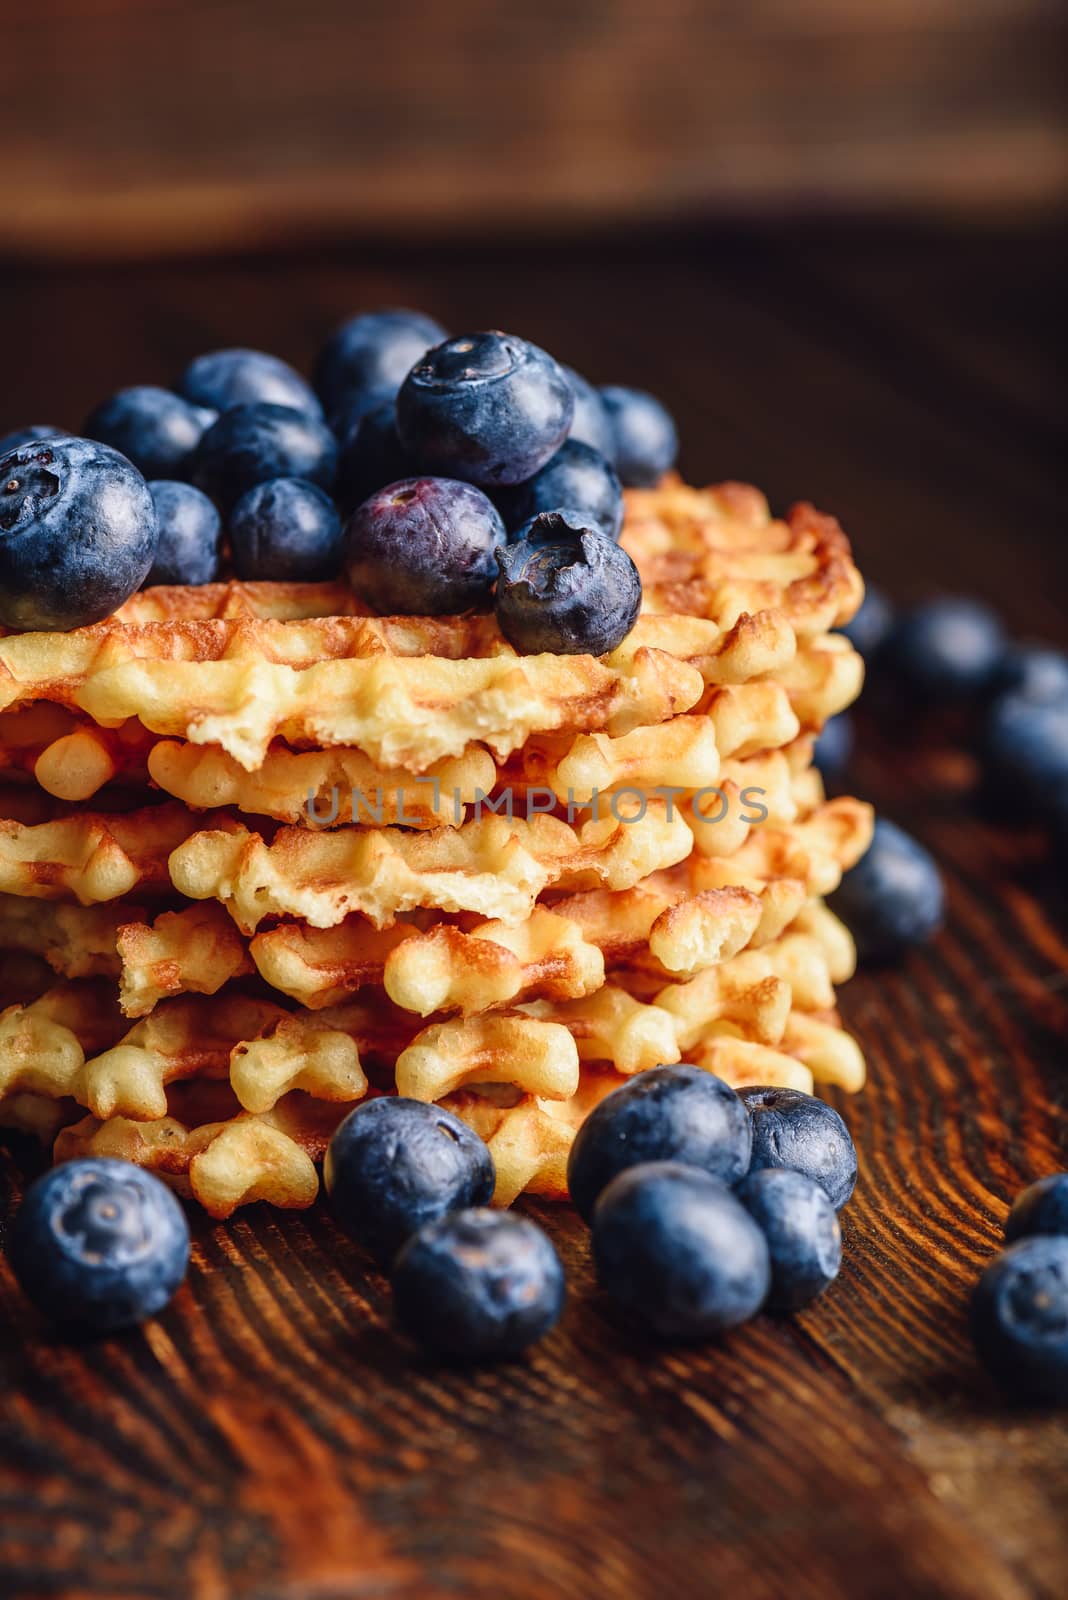 Stack of Waffles with Blueberry. by Seva_blsv